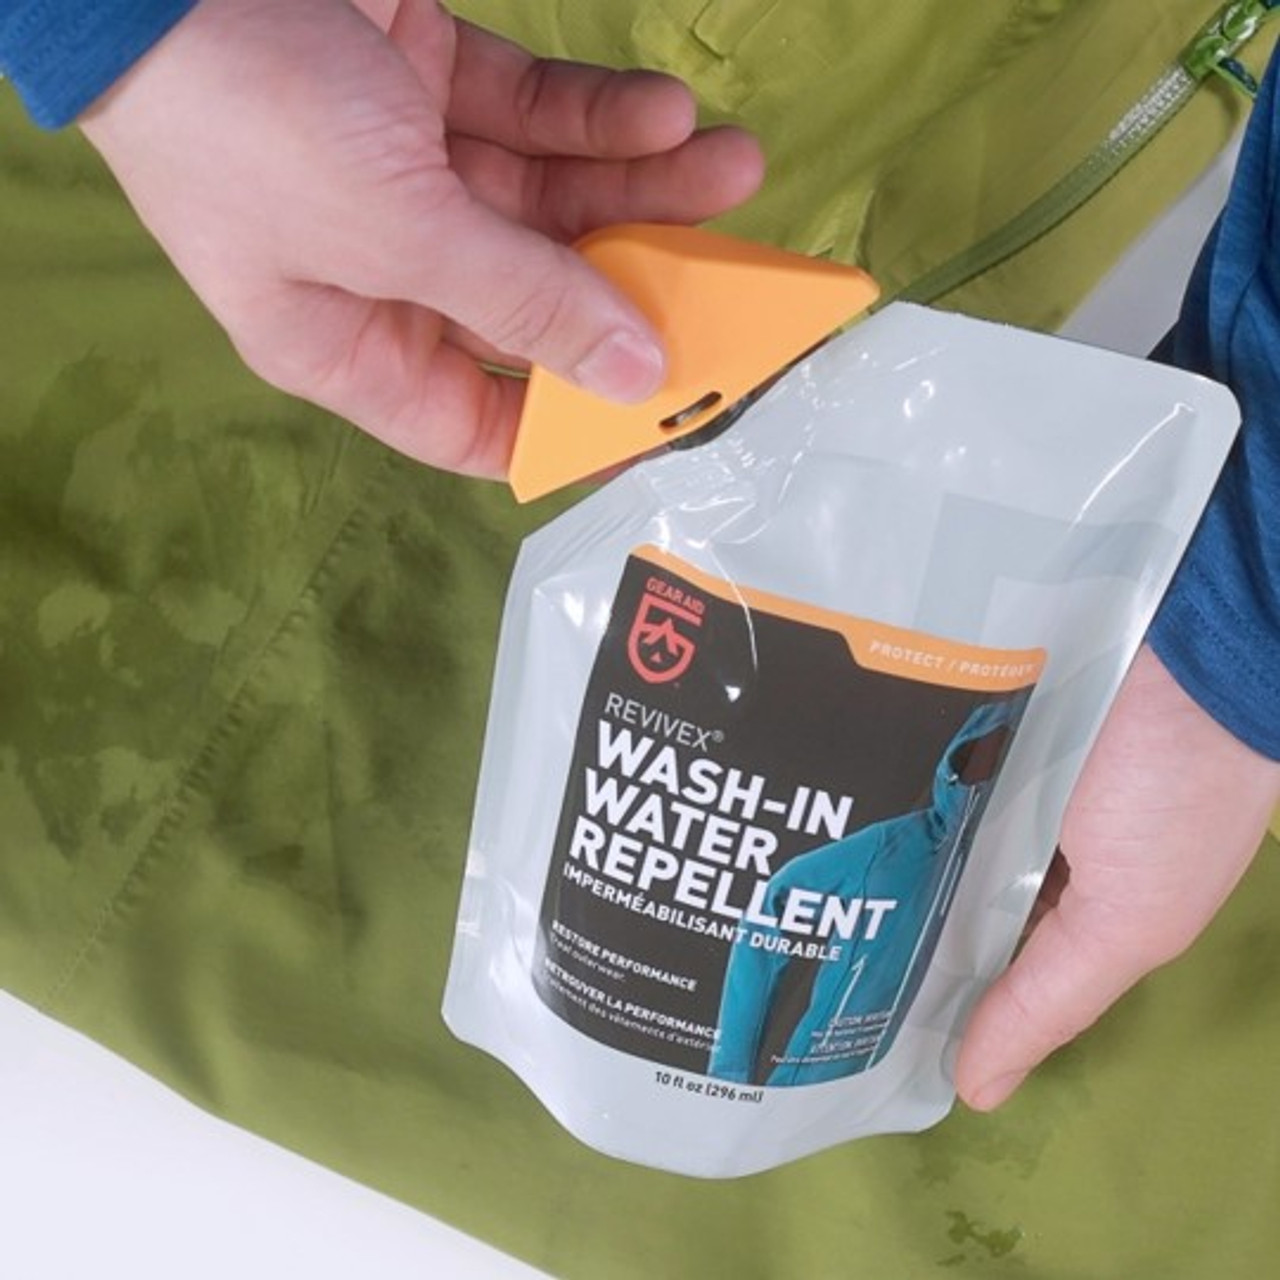 How to Use Waterproofing Spray and Wash for Jackets, Tents, and